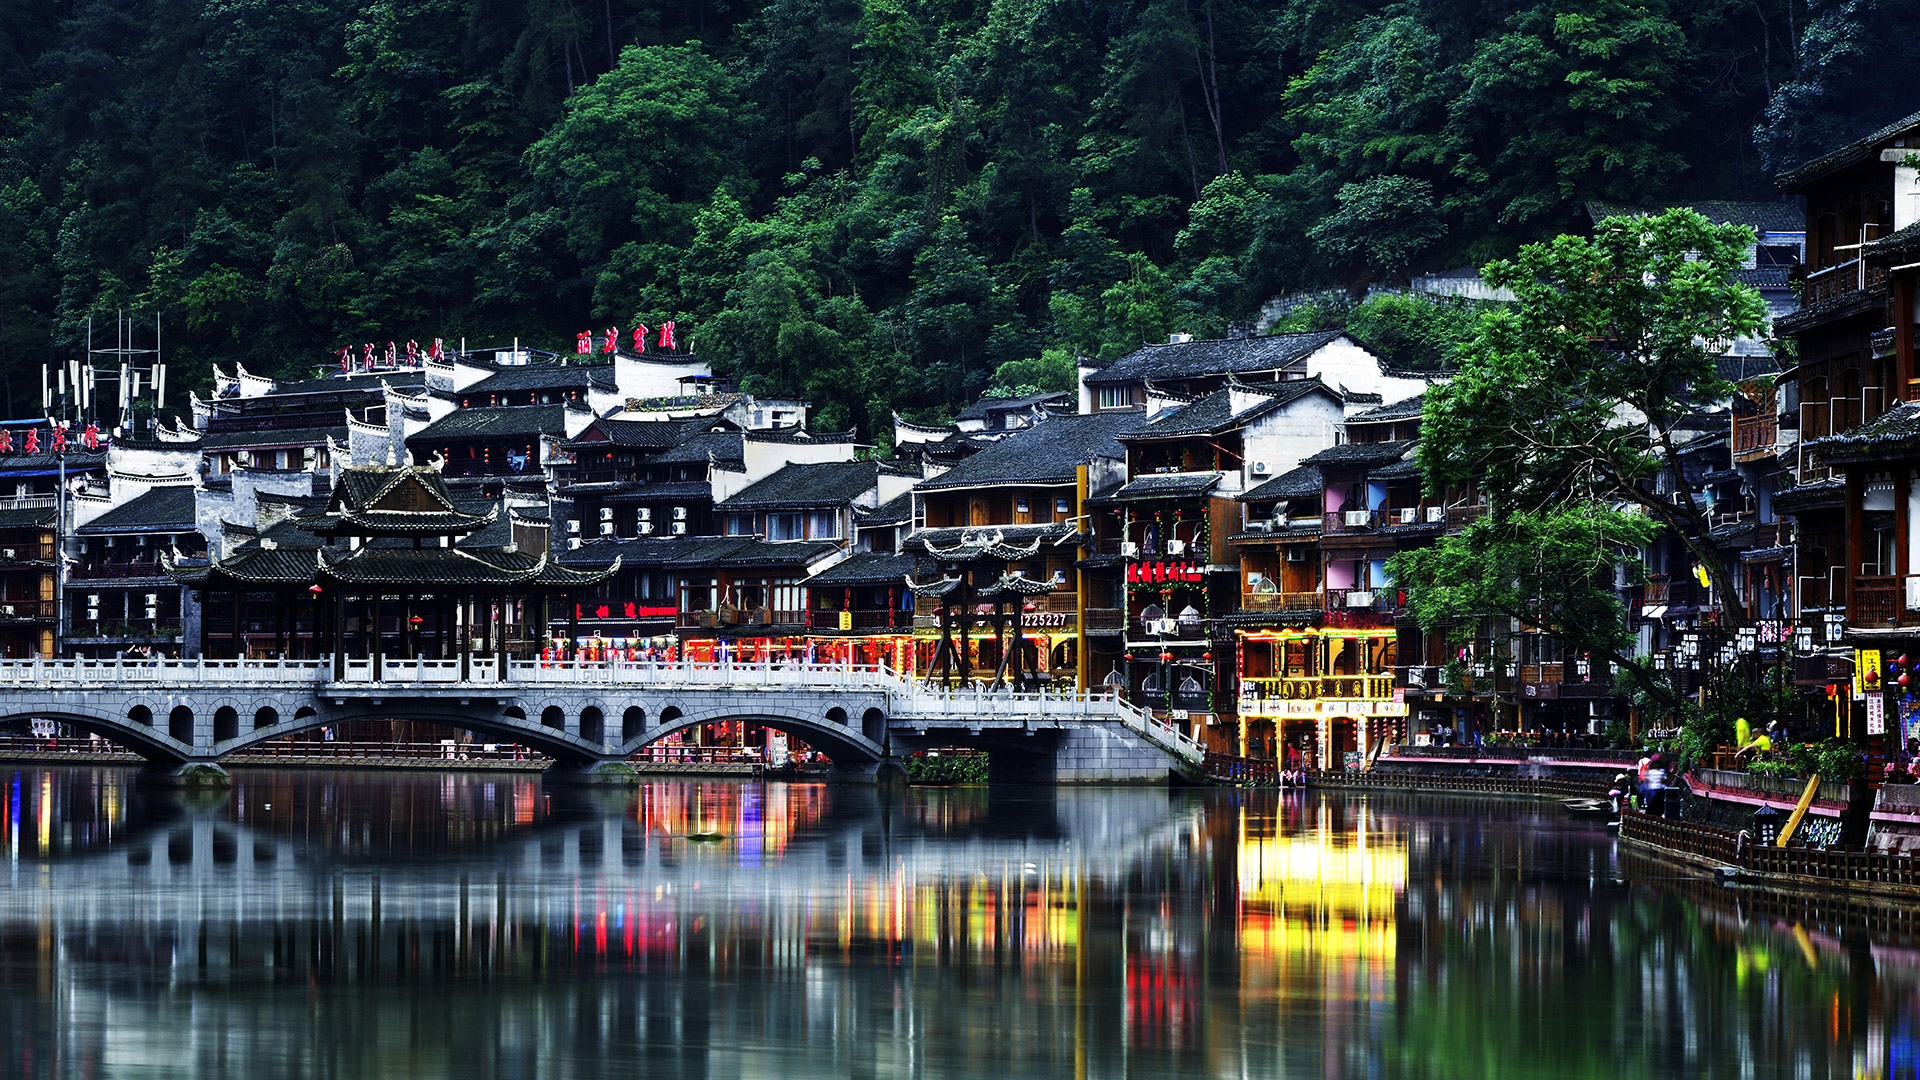 Fenghuang scenic ancient town, Hunan Province, China